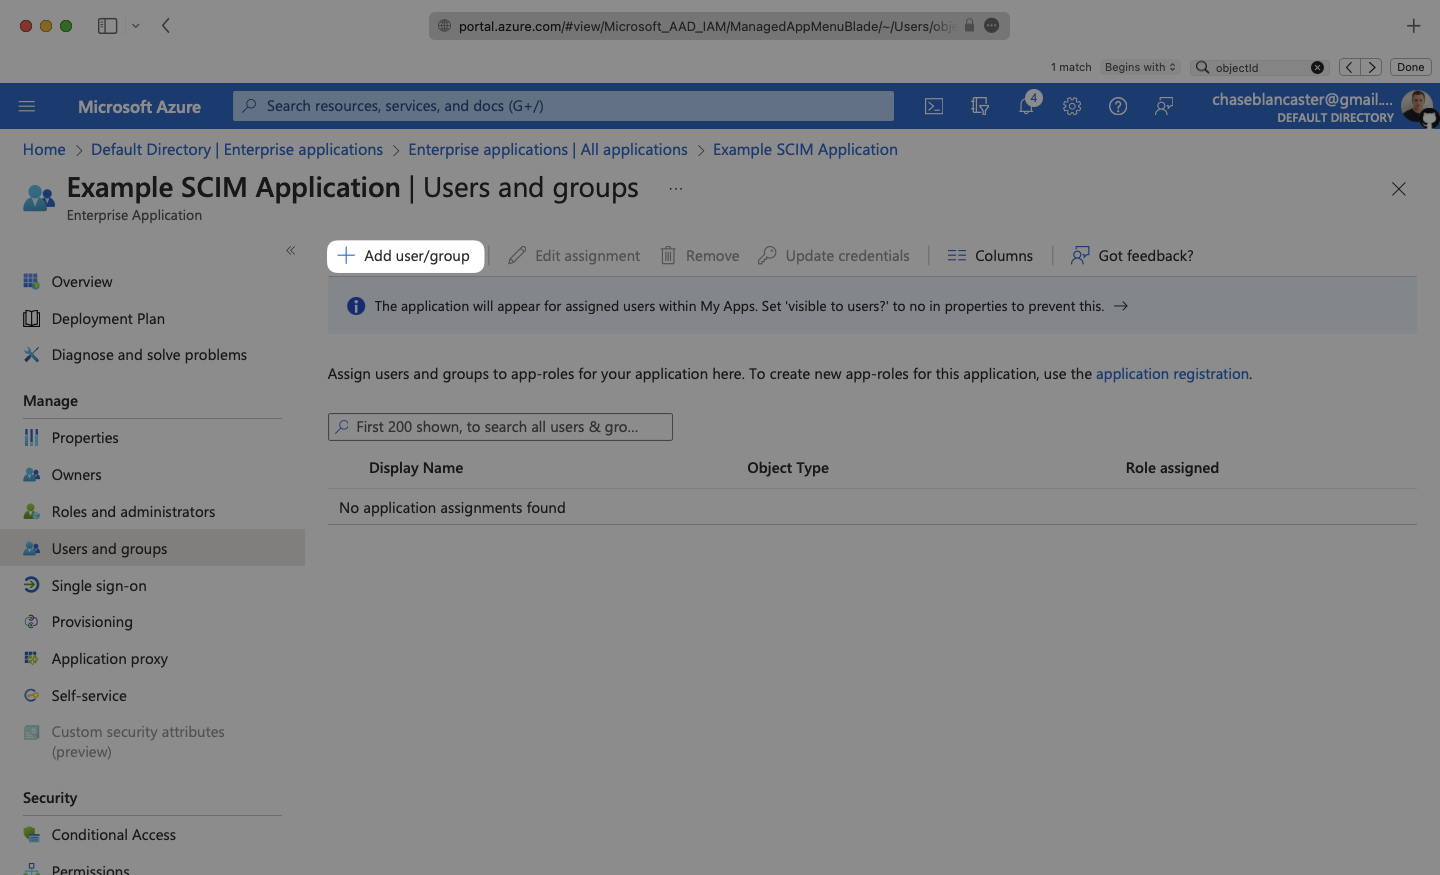 A screenshot showing where to select "Add user/group" in the Users and groups menu in Azure.